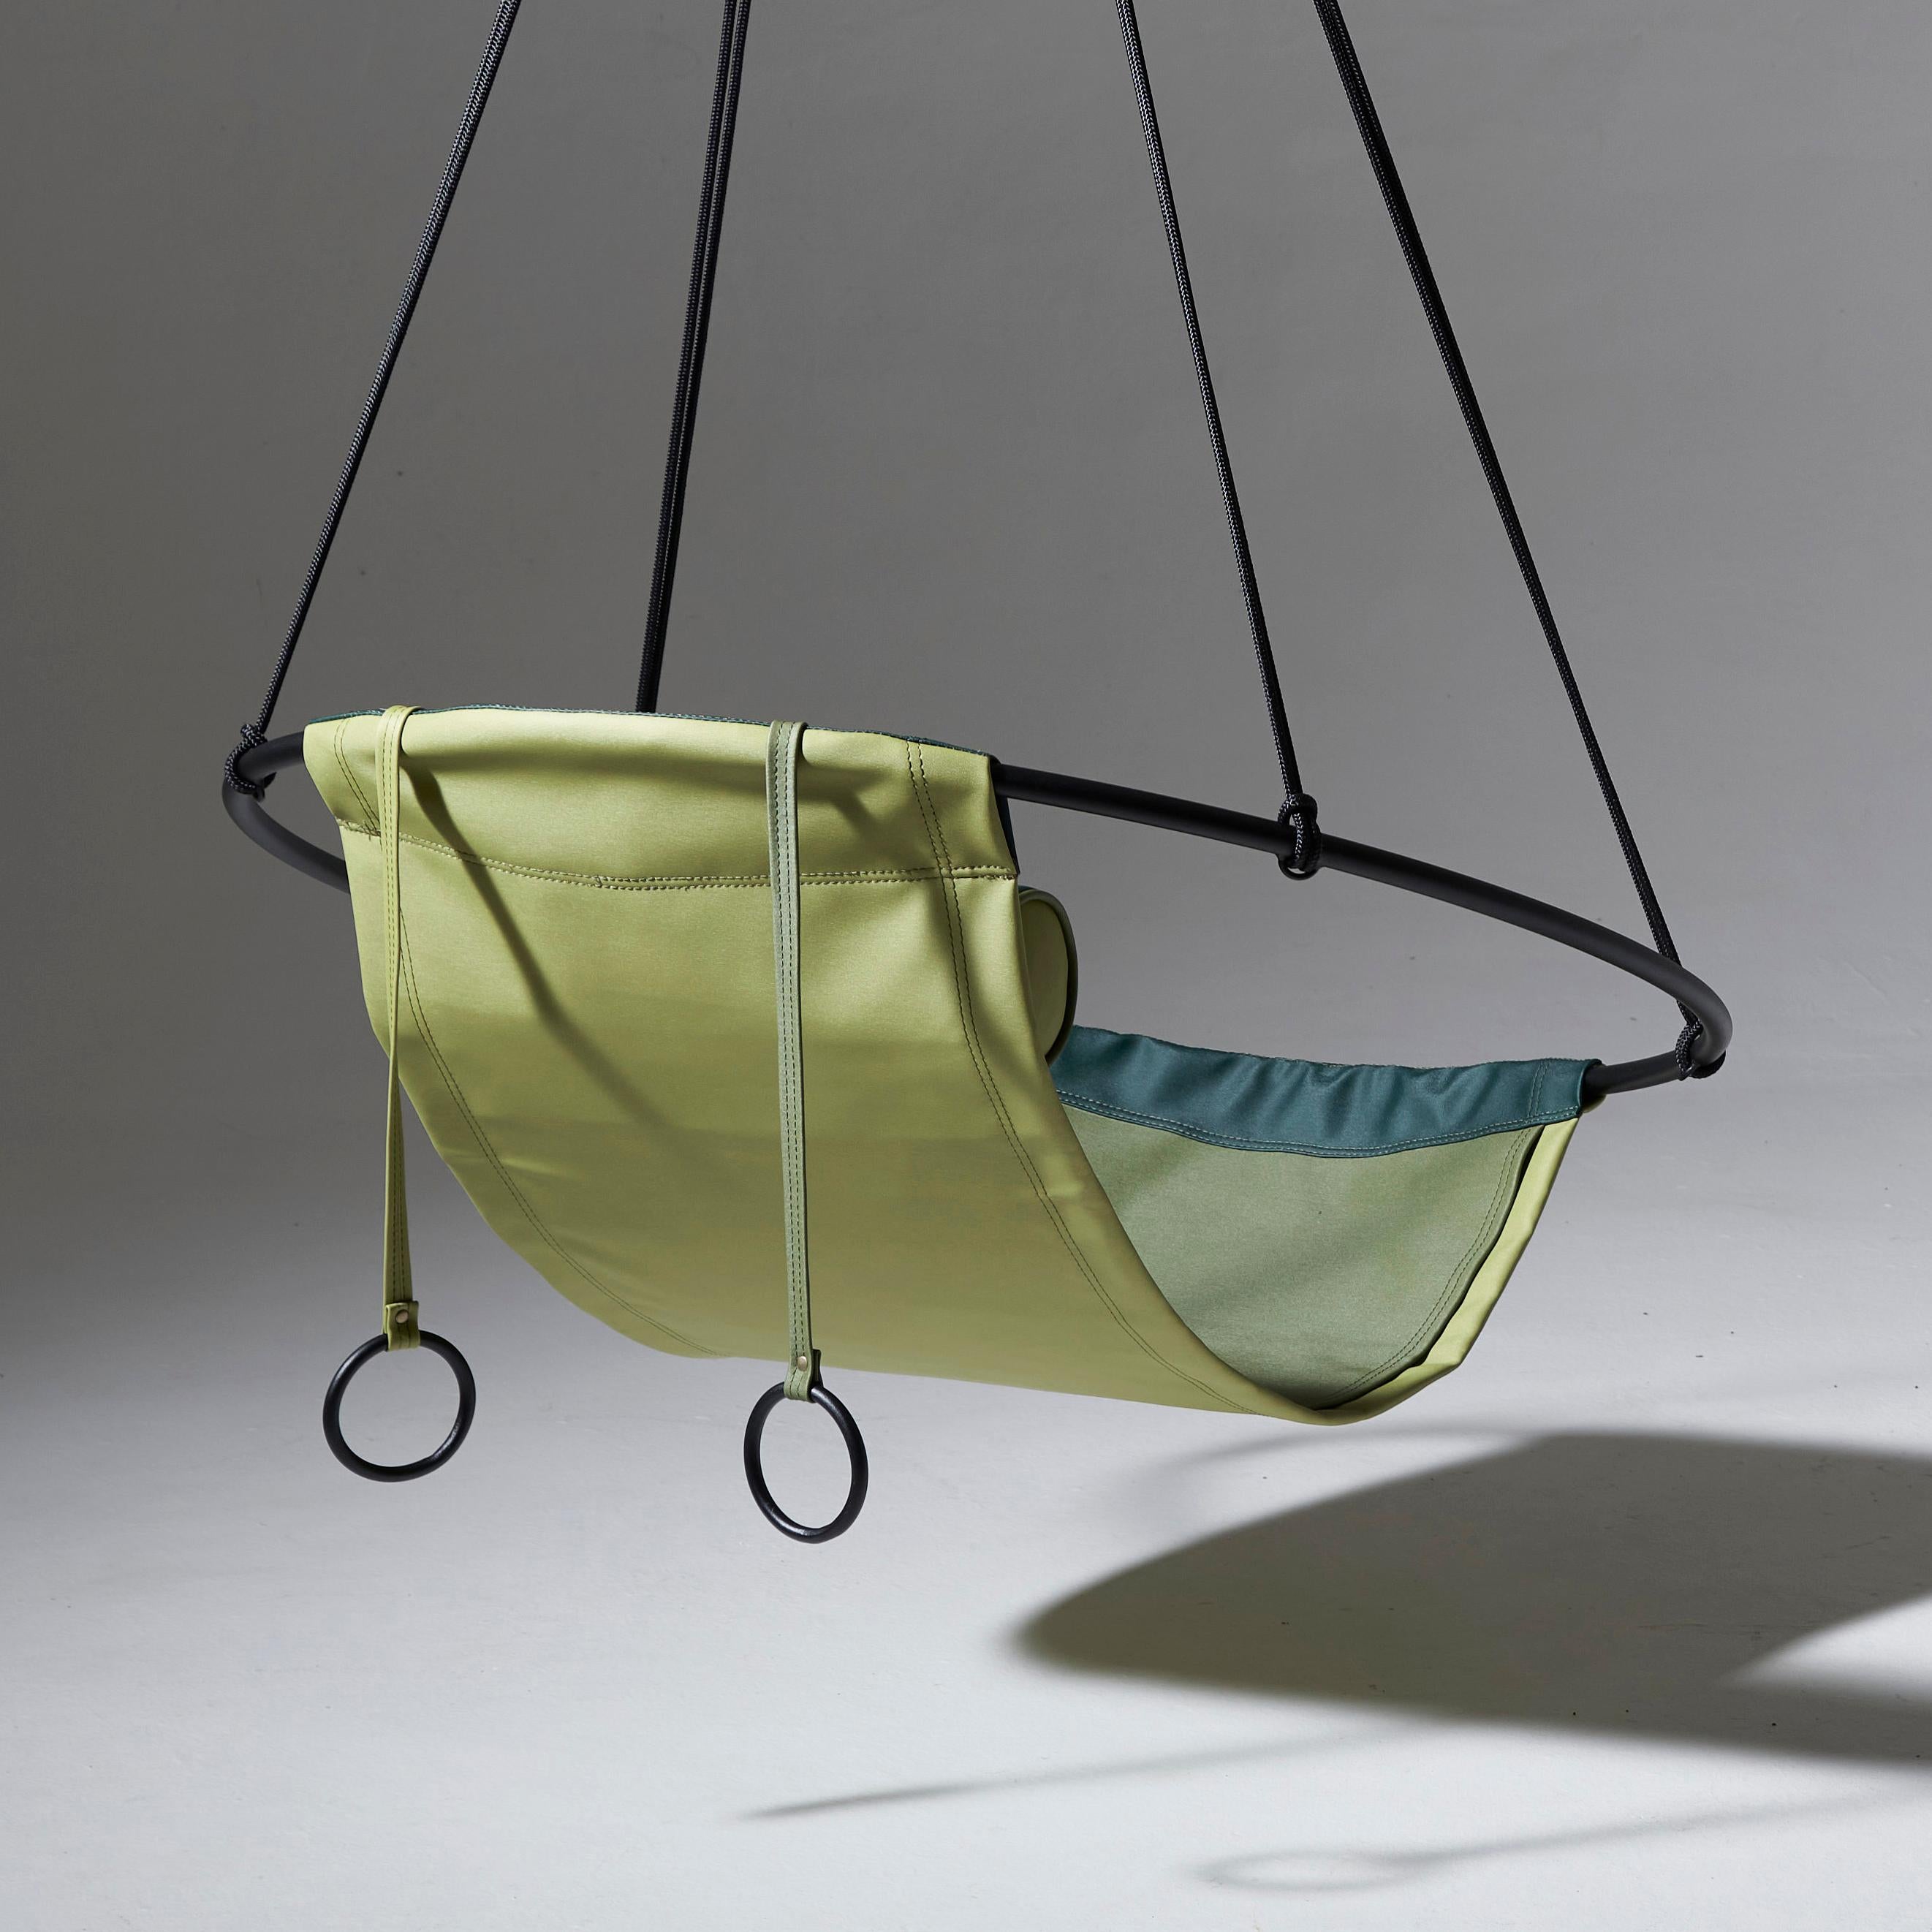 Contemporary Modern Hanging Sling Chair for Outdoor in Greens, Customisable For Sale